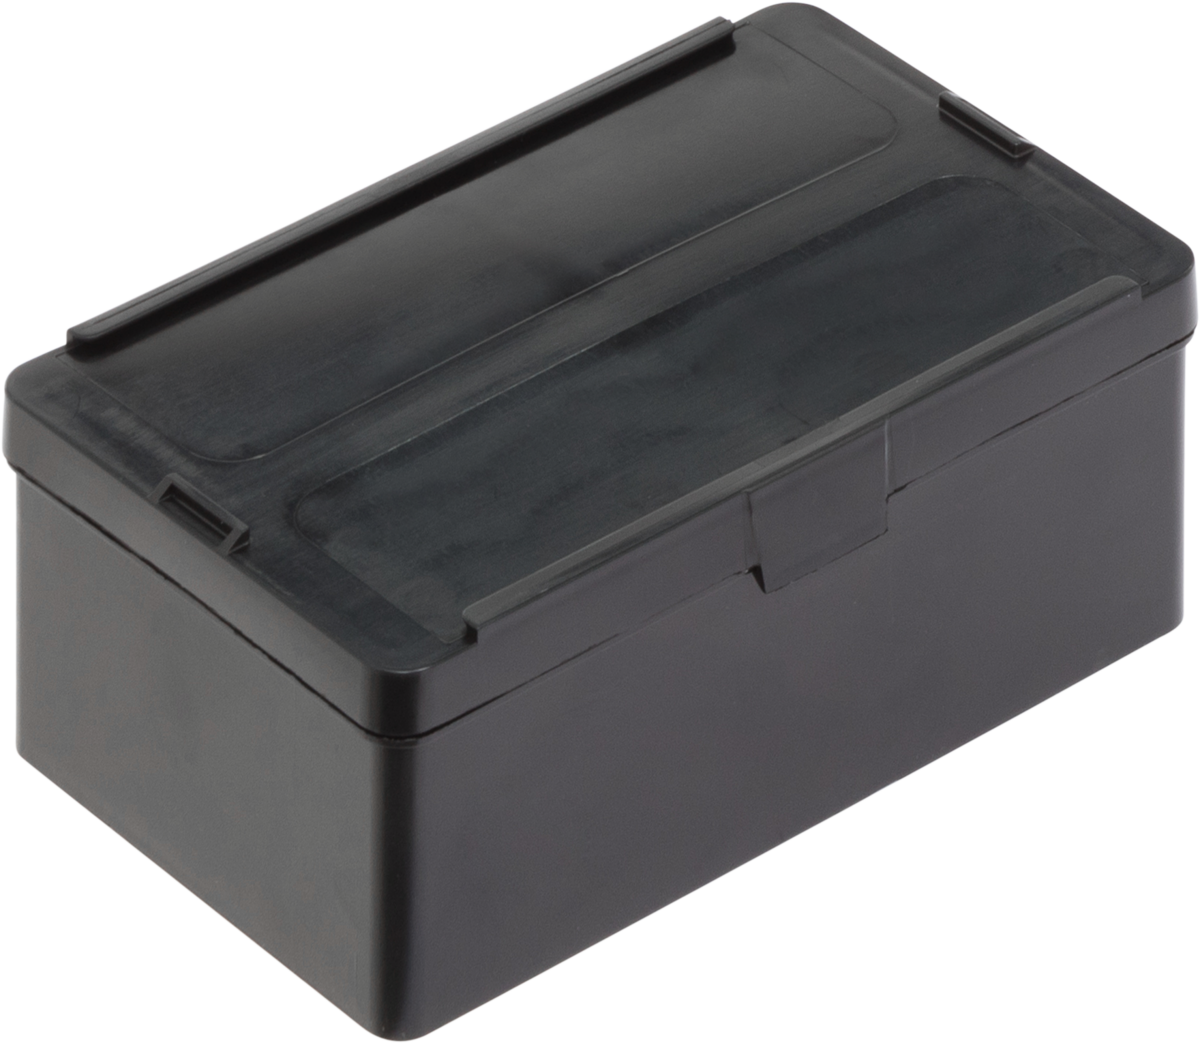 ESD-Lidded-Box-with-Hinged-Lid-H55mm-flat-base_Ref.-1308.050.992_1004154_136x87x55_01